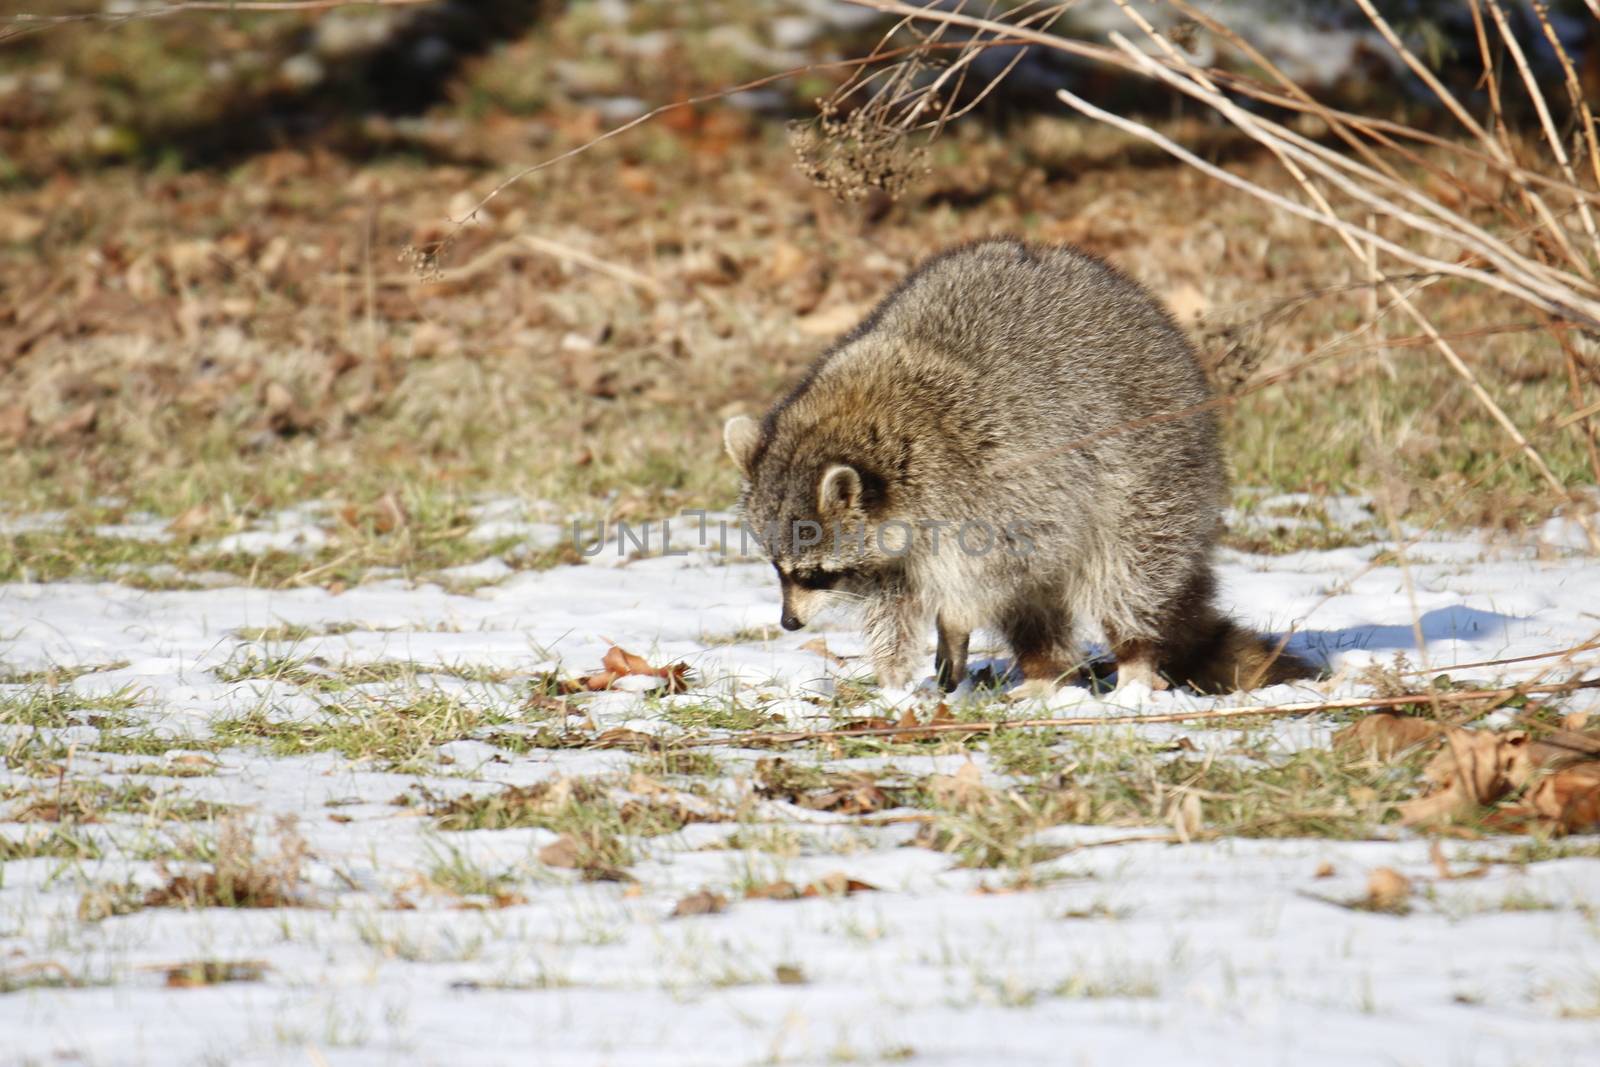 Rabid Raccoon foaming at the mouth. While this particular raccoon may not be rabid, a wet sick raccoon foaming at the mouth is a sign of rabies. Rabies is deadly. by mynewturtle1